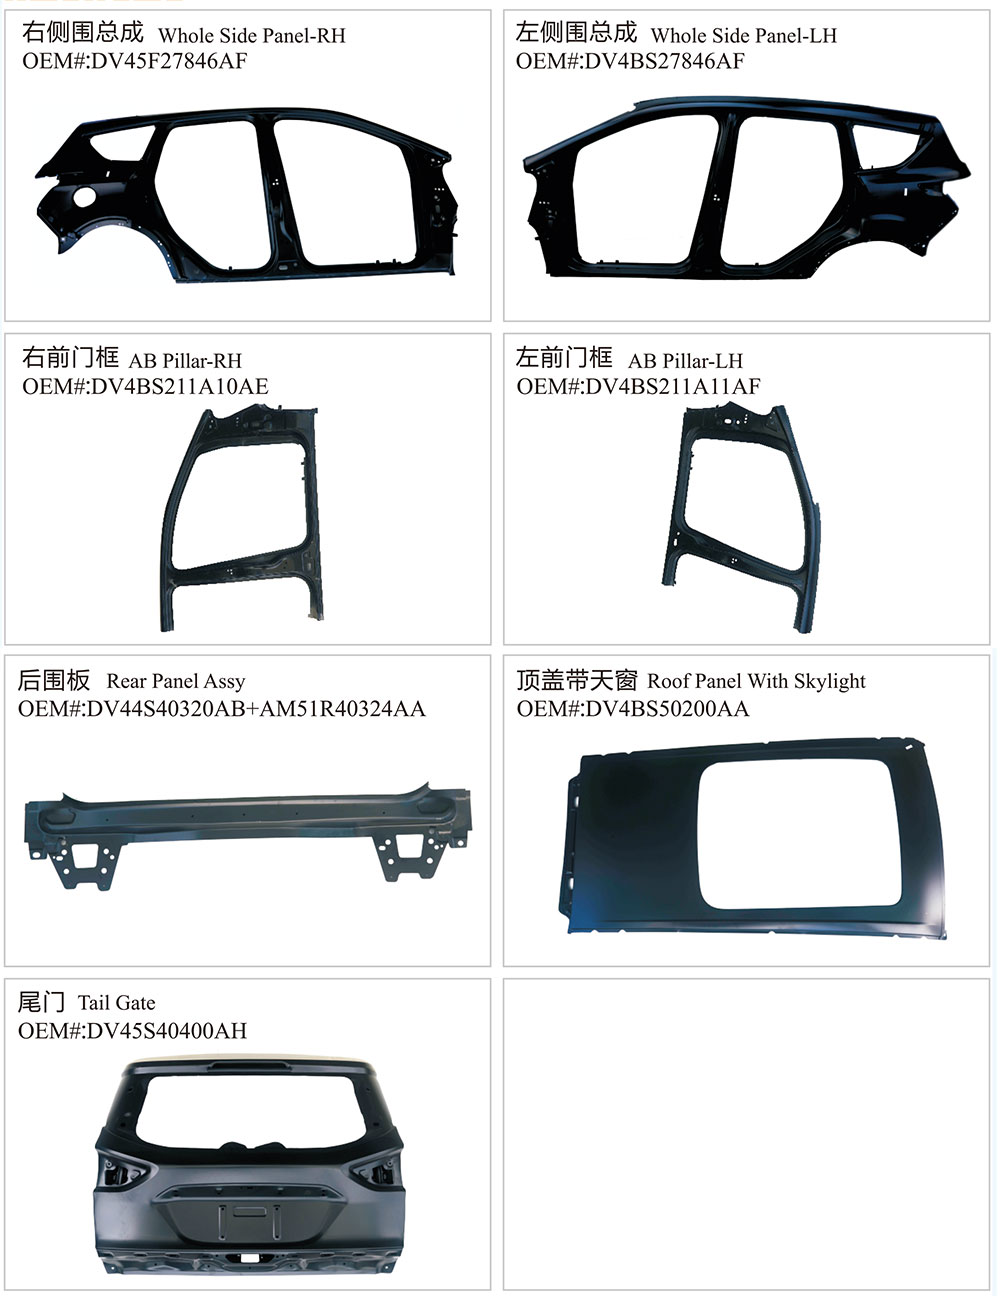 Whole Side Panel for Ford Kuga / Escape 2013